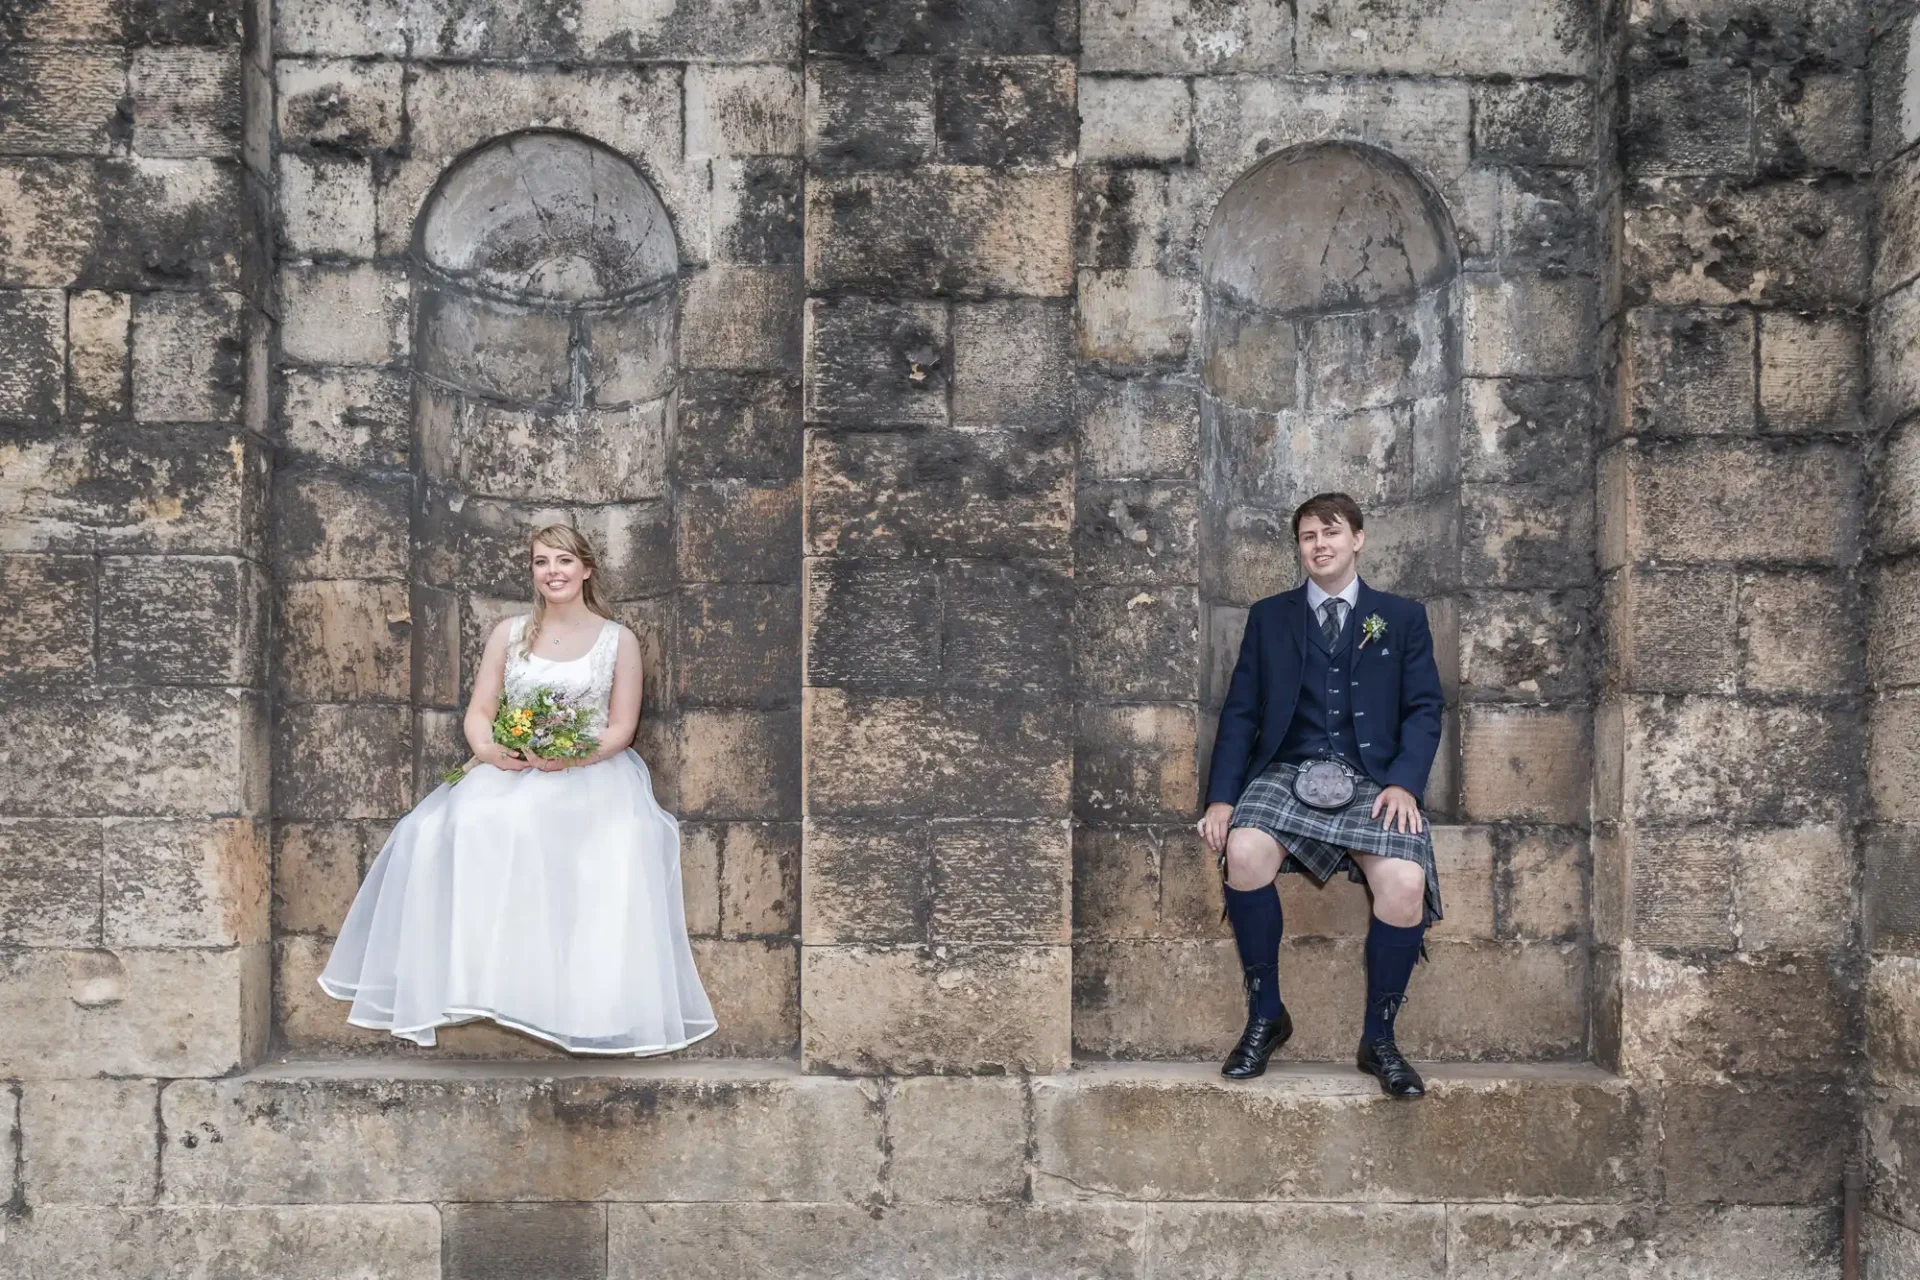 Bride and groom in formal wear sitting separately in two stone niches of an old wall, smiling.